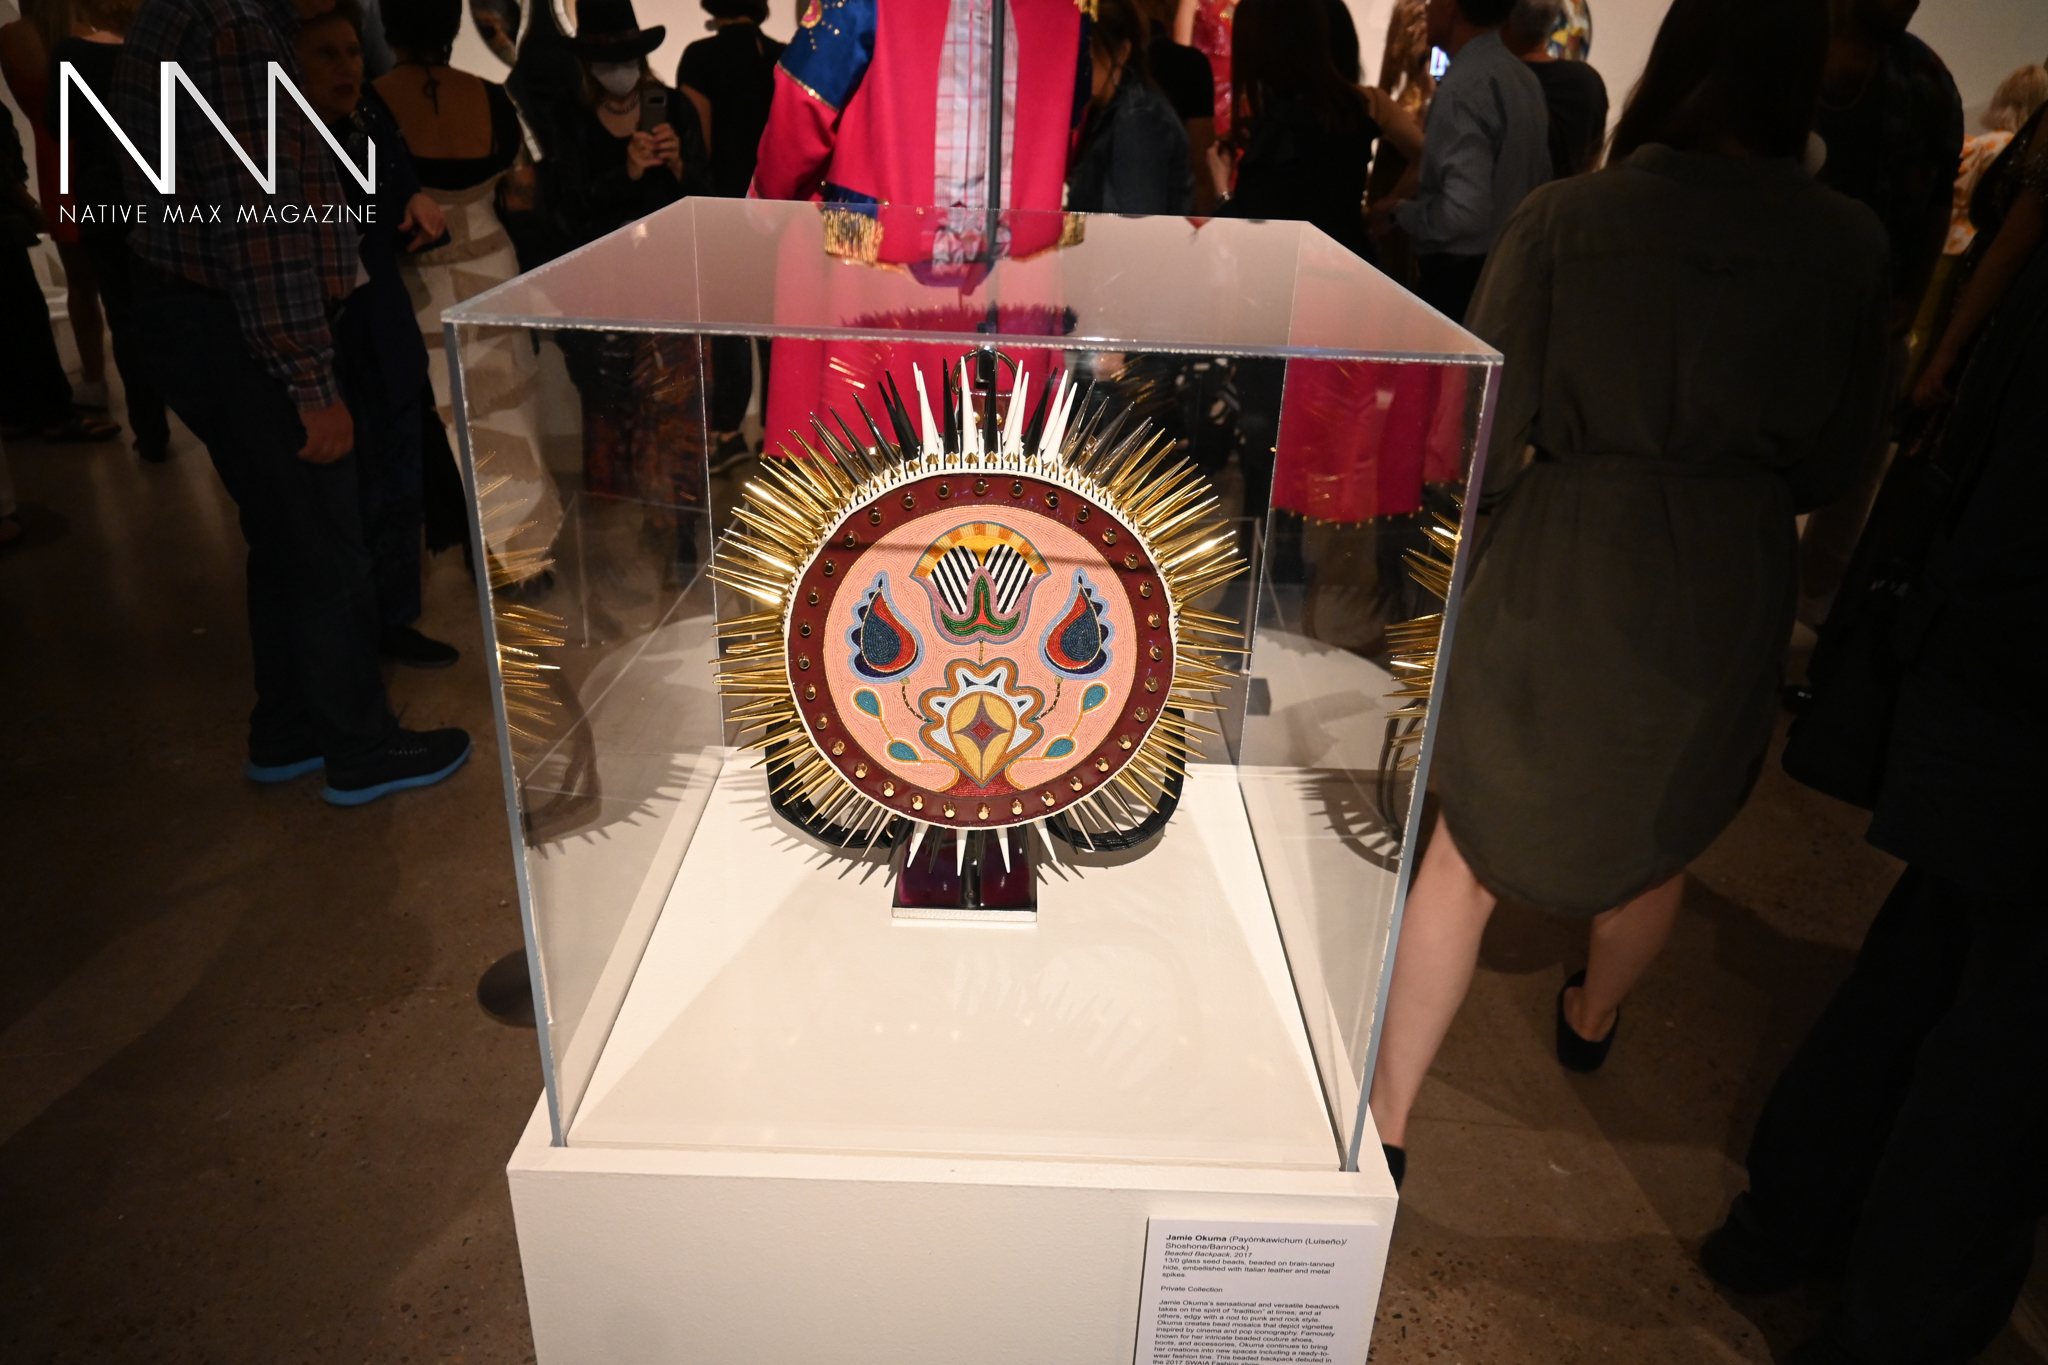 Attention Fashion Lovers: Art of Indigenous Fashion Exhibit at